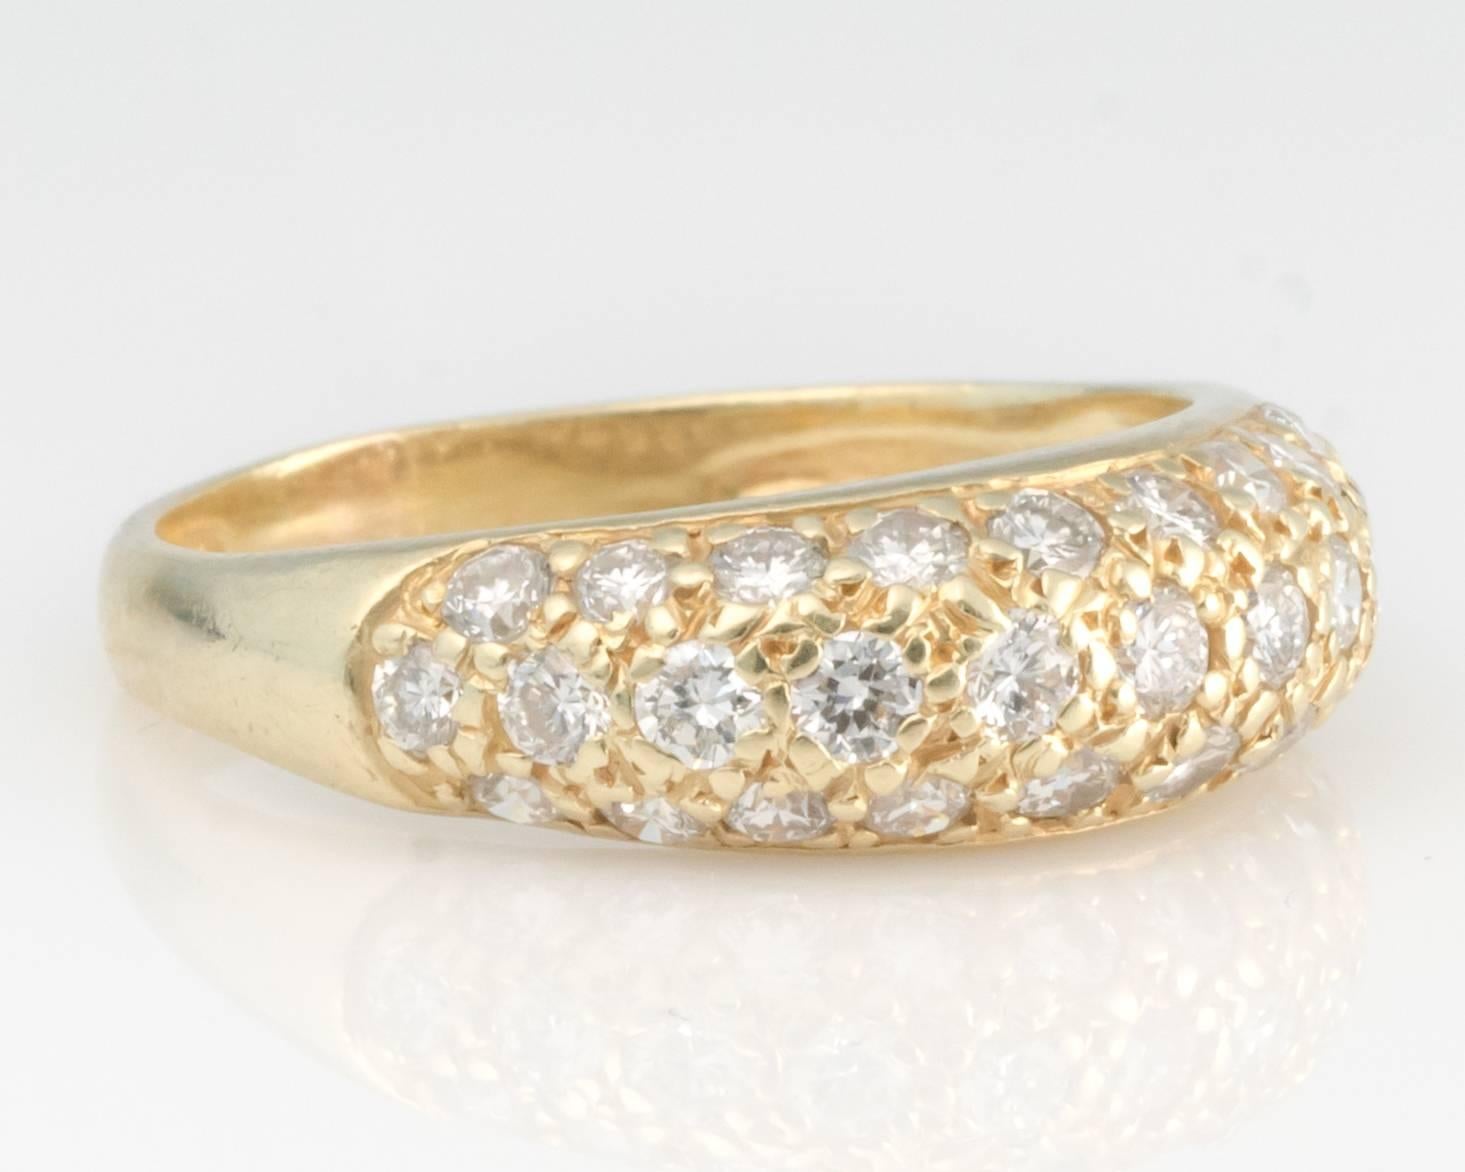 This elegant pave set 18 karat yellow gold dome ring will make a classic addition to anyone's jewelry collection. It can be worn as a wedding band or as an individual  ring. This stunning 3.46 gram total weight ring has .5 carats of diamonds.